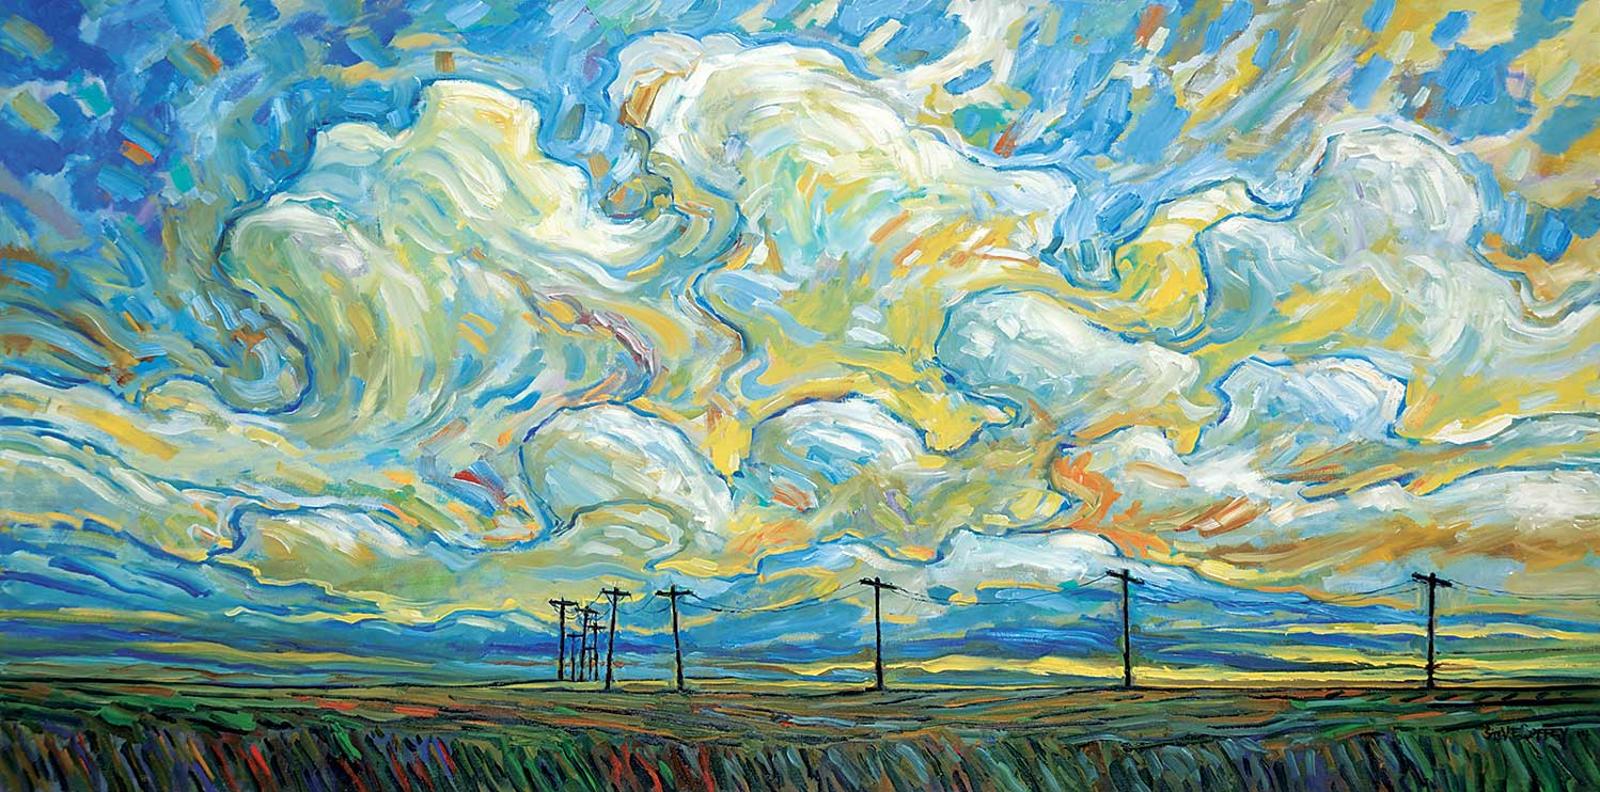 Steve Coffey (1963) - Summer Poles and Swimming Sky